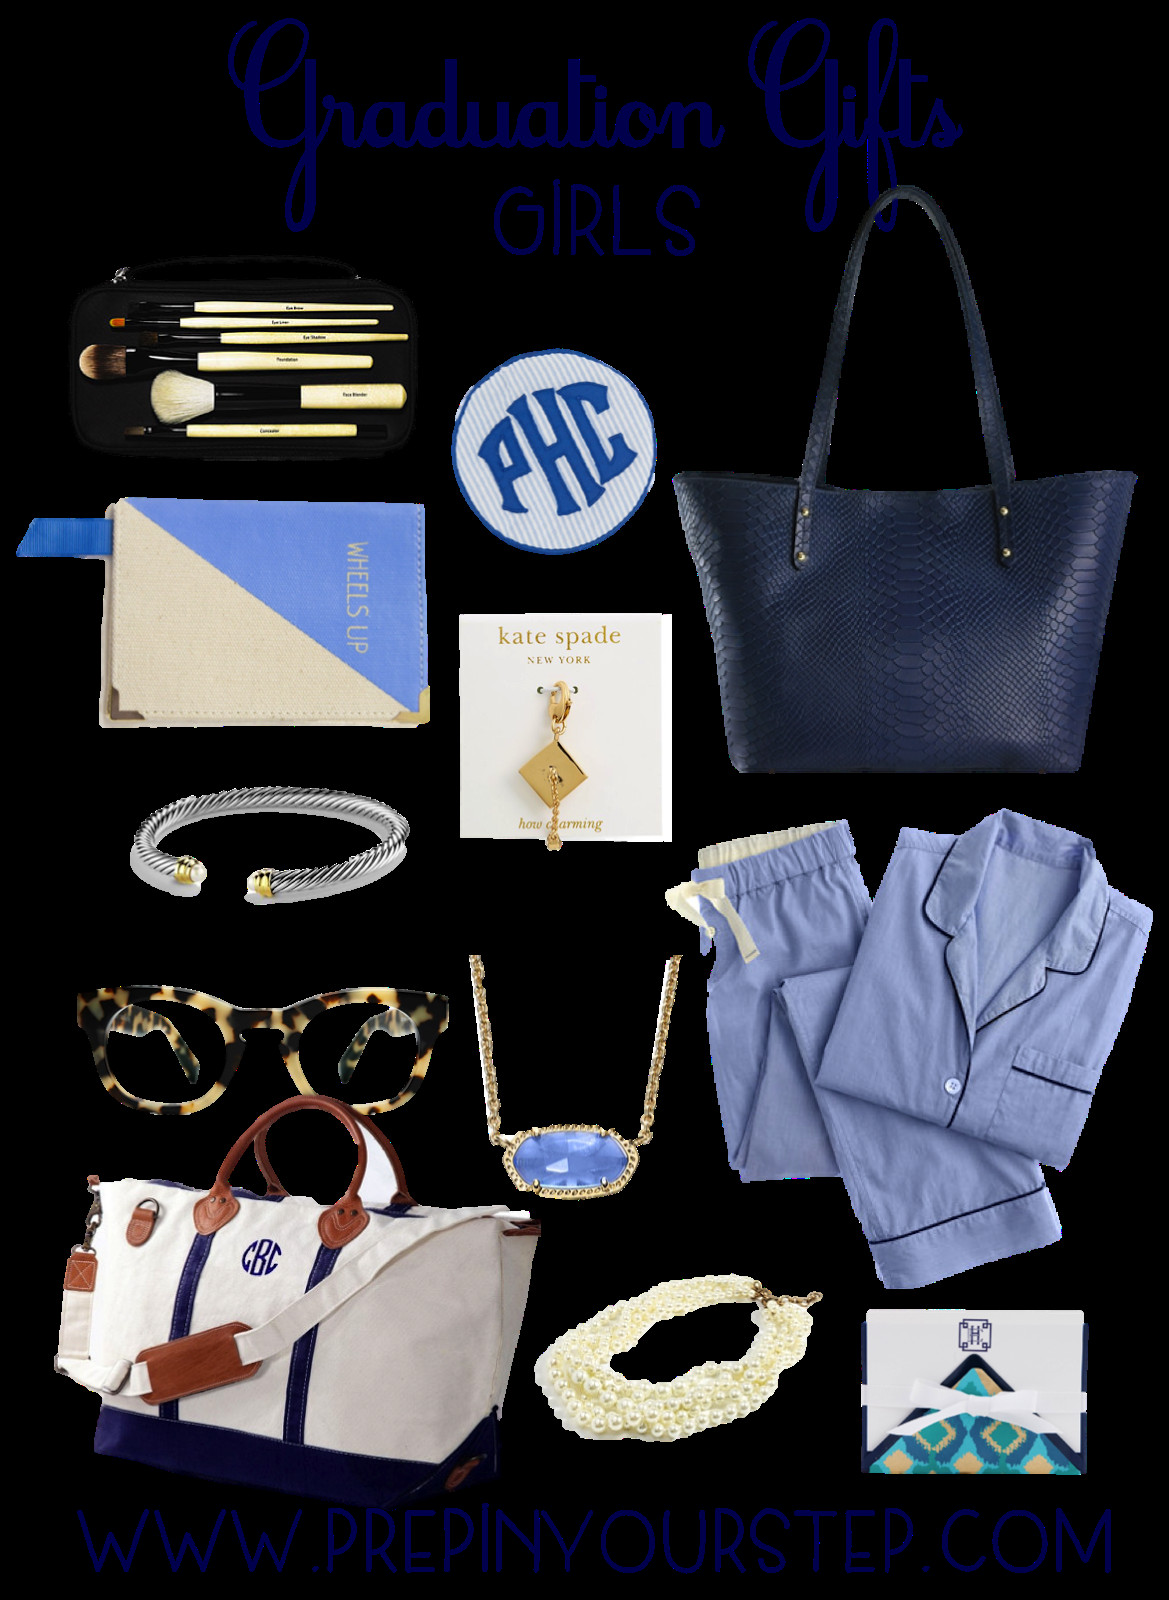 Grad Gift Ideas For Girls
 Prep In Your Step Graduation Gift Ideas Guys & Girls